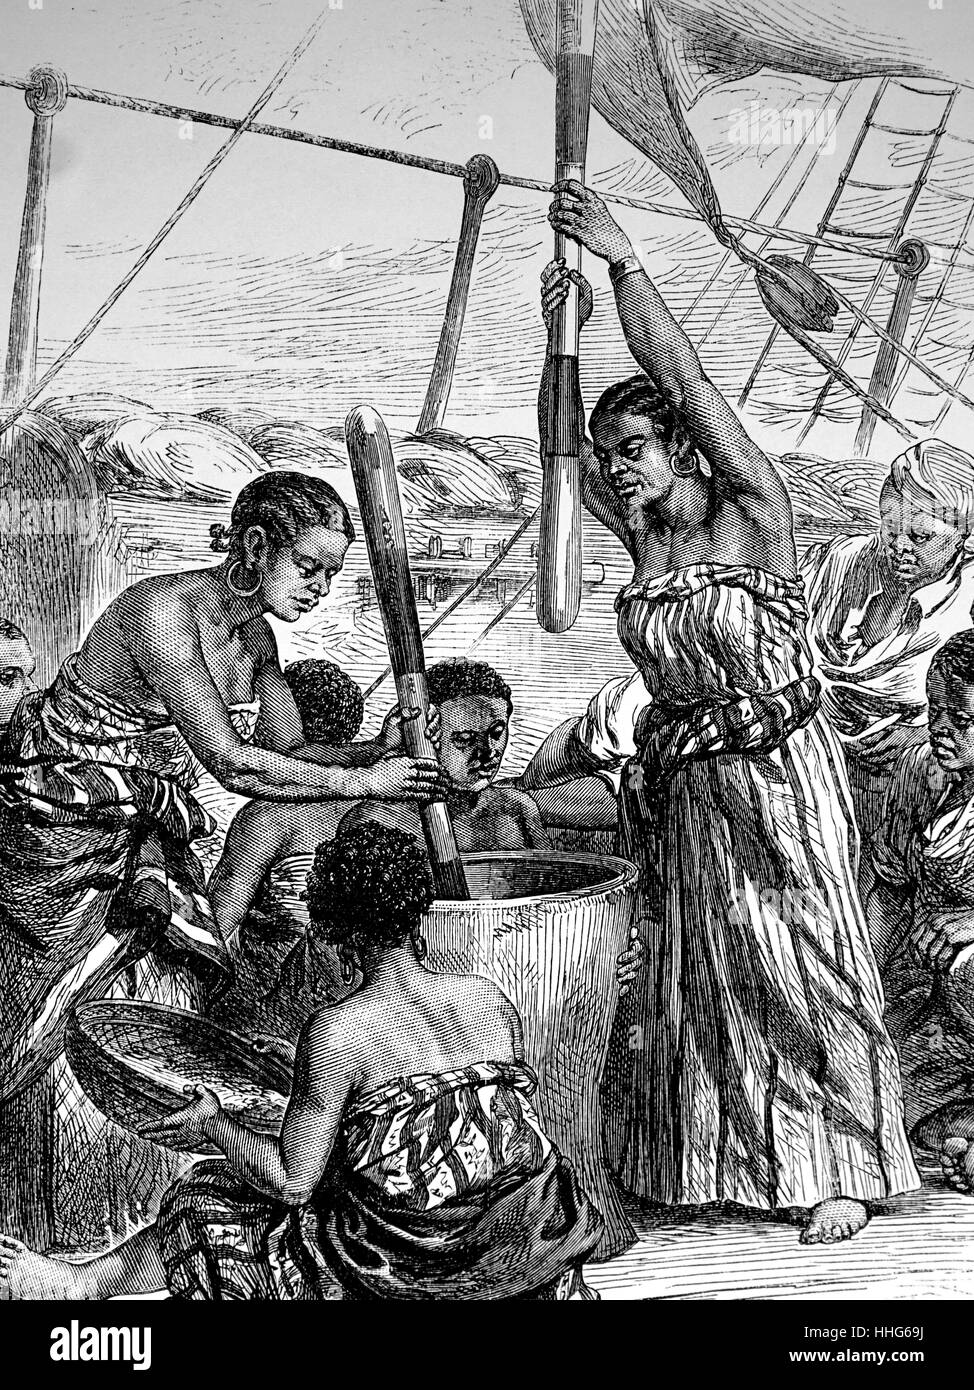 East African women, freed from Arab slave dhows, pounding Millet, on board HMS Lynx. Stock Photo